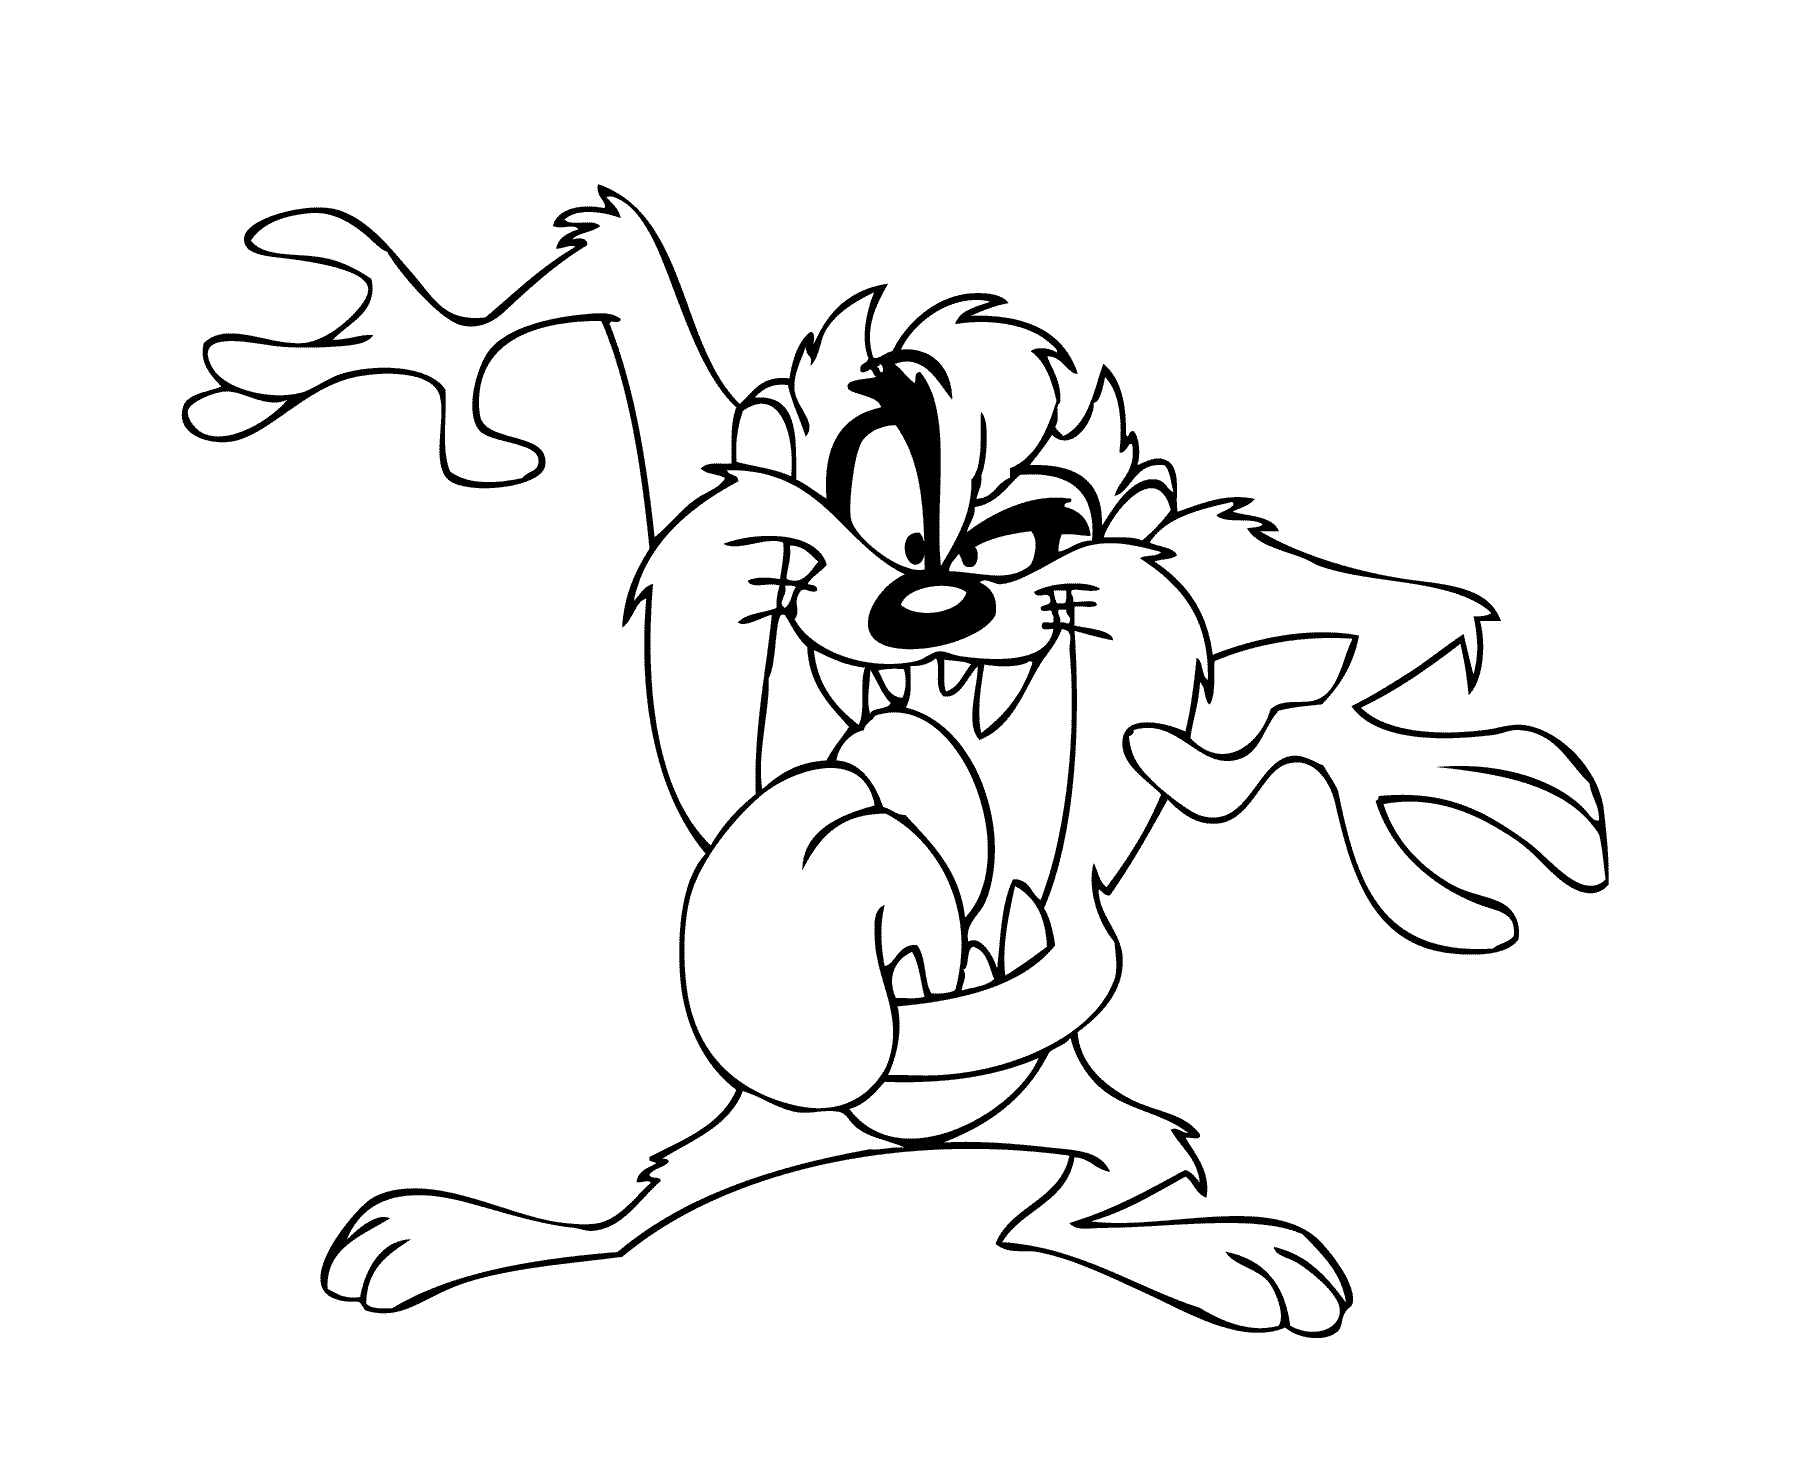 Tazmanian devil coloring pages for kids printable free